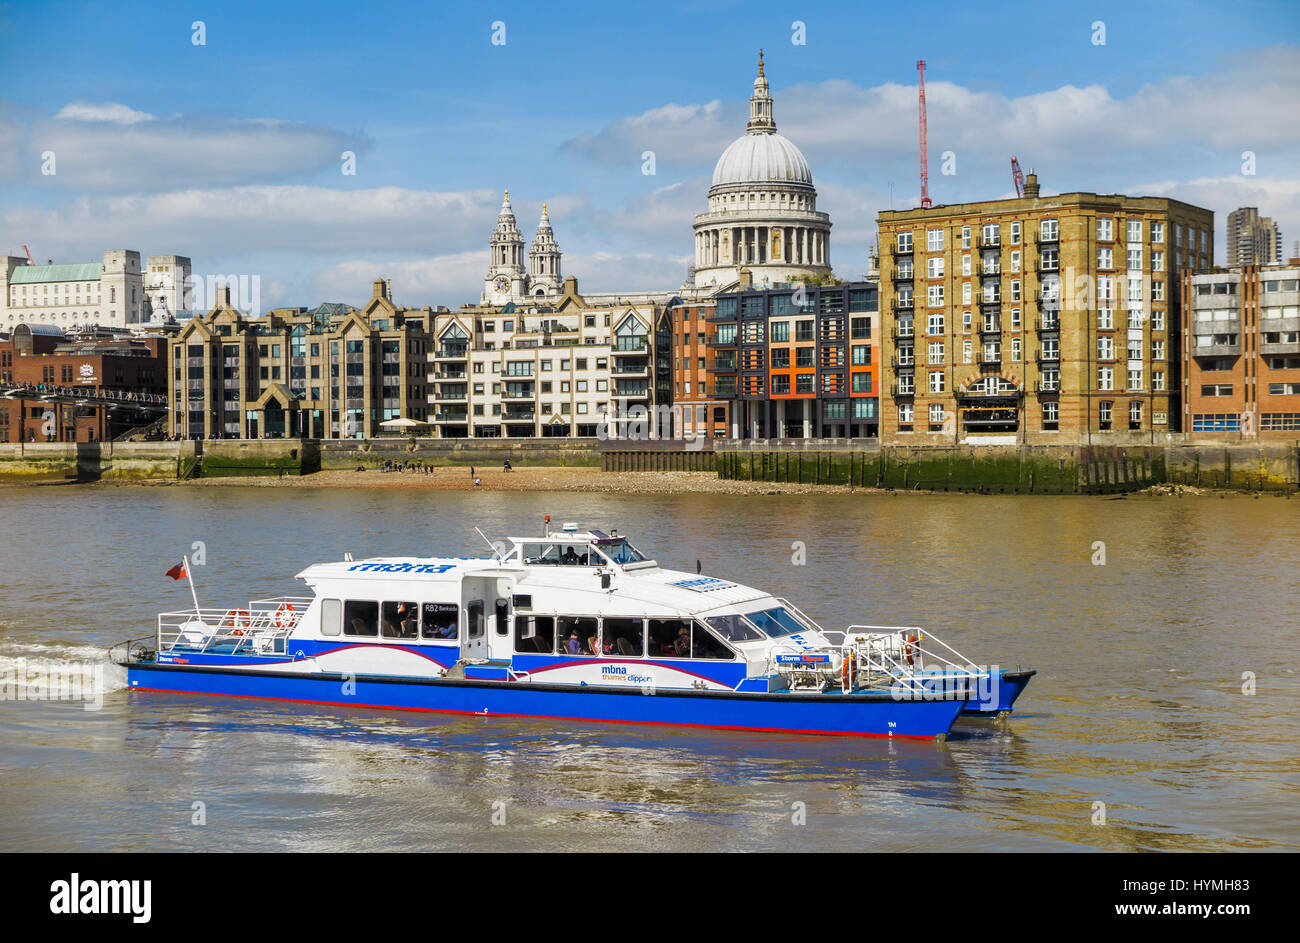 Blue and white Catamaran Thames Clipper boat forming part of the river bus service, Bankside pier, St Paul's in the background Stock Photo